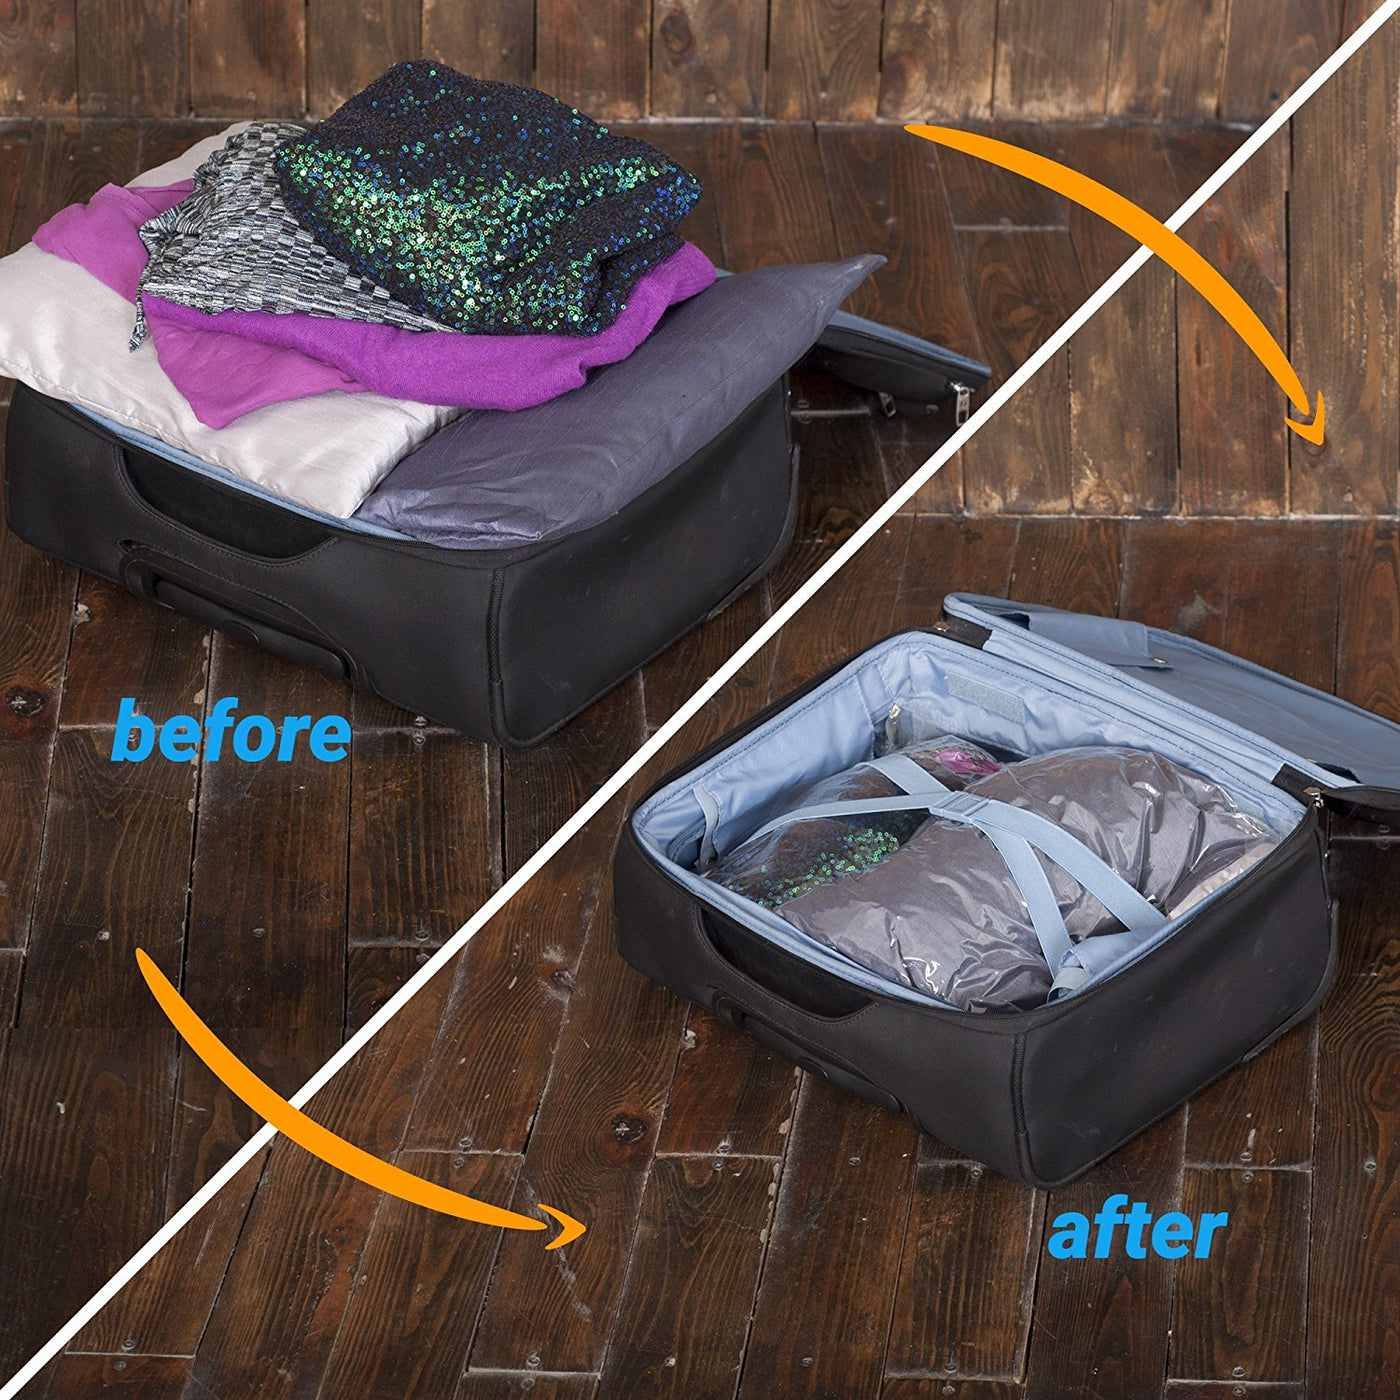 8 Travel Space Saver Bags - No Vacuum or Pump Needed - Luggage Accessories  4L 4M - The ICT University